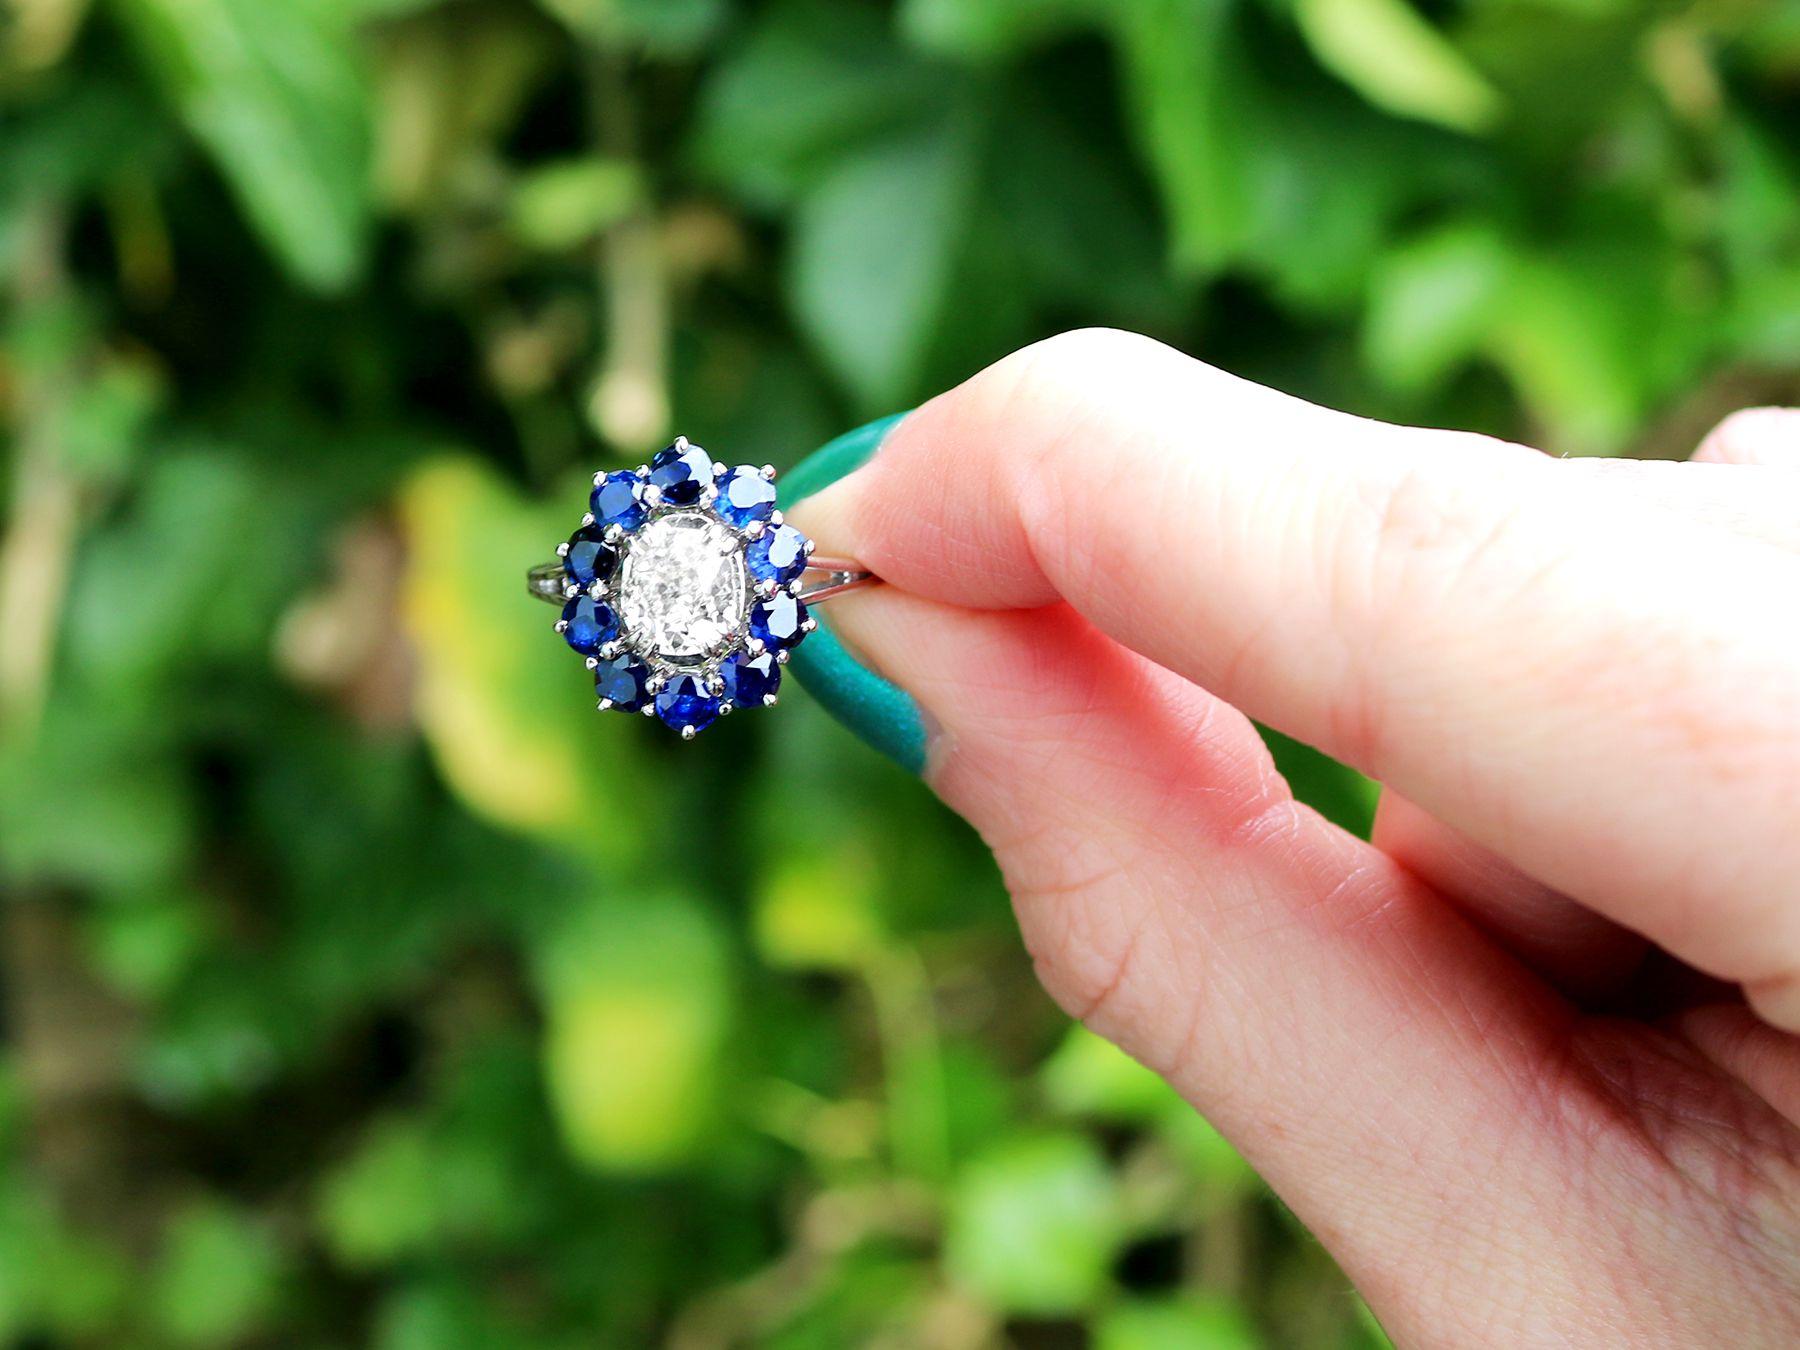 A stunning and impressive vintage 0.95 carat sapphire diamond, 18 karat white gold cocktail ring; part of our diverse antique estate jewelry collections

This stunning, fine and impressive vintage diamond and sapphire ring has been crafted in 18k